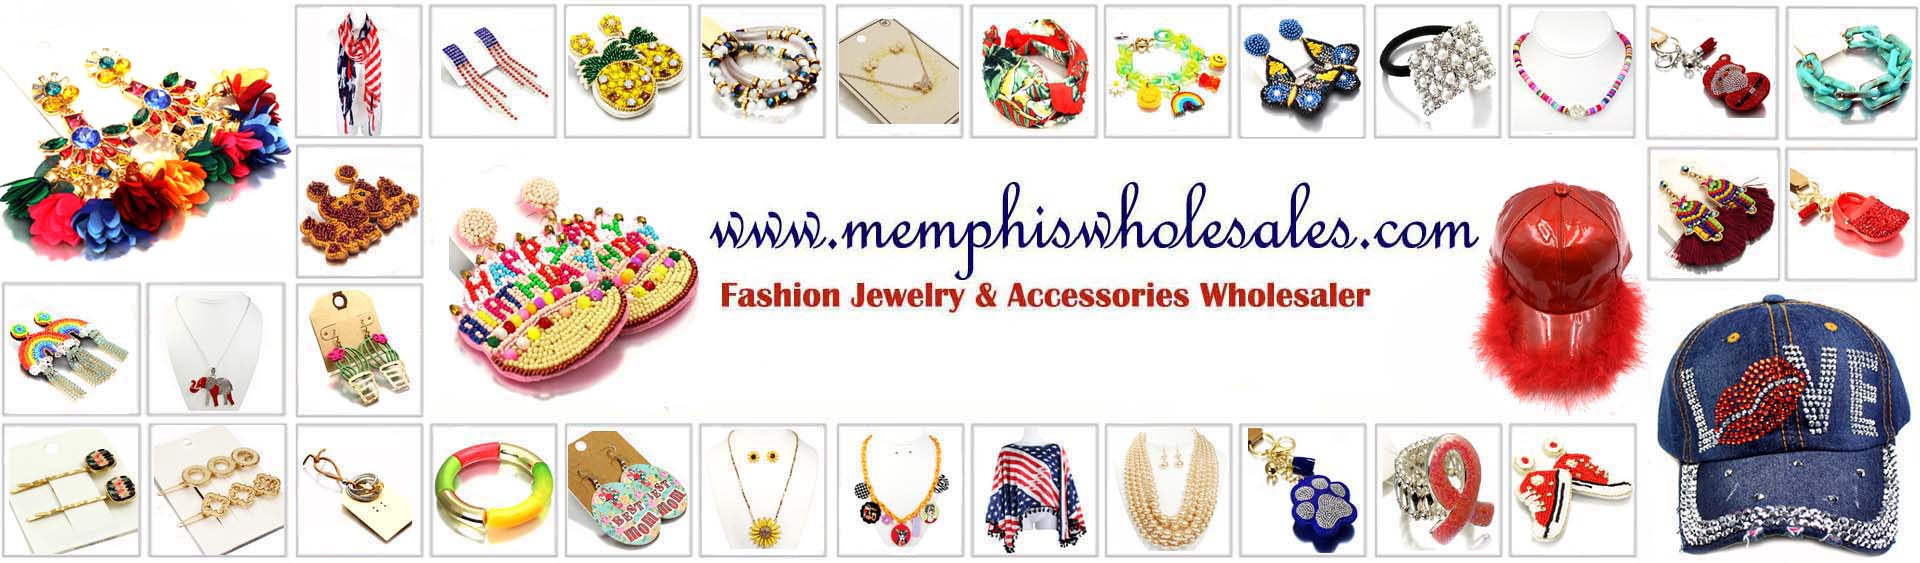 Wholesale Clearance Deals on Jewelry, Clothing, and Accessories